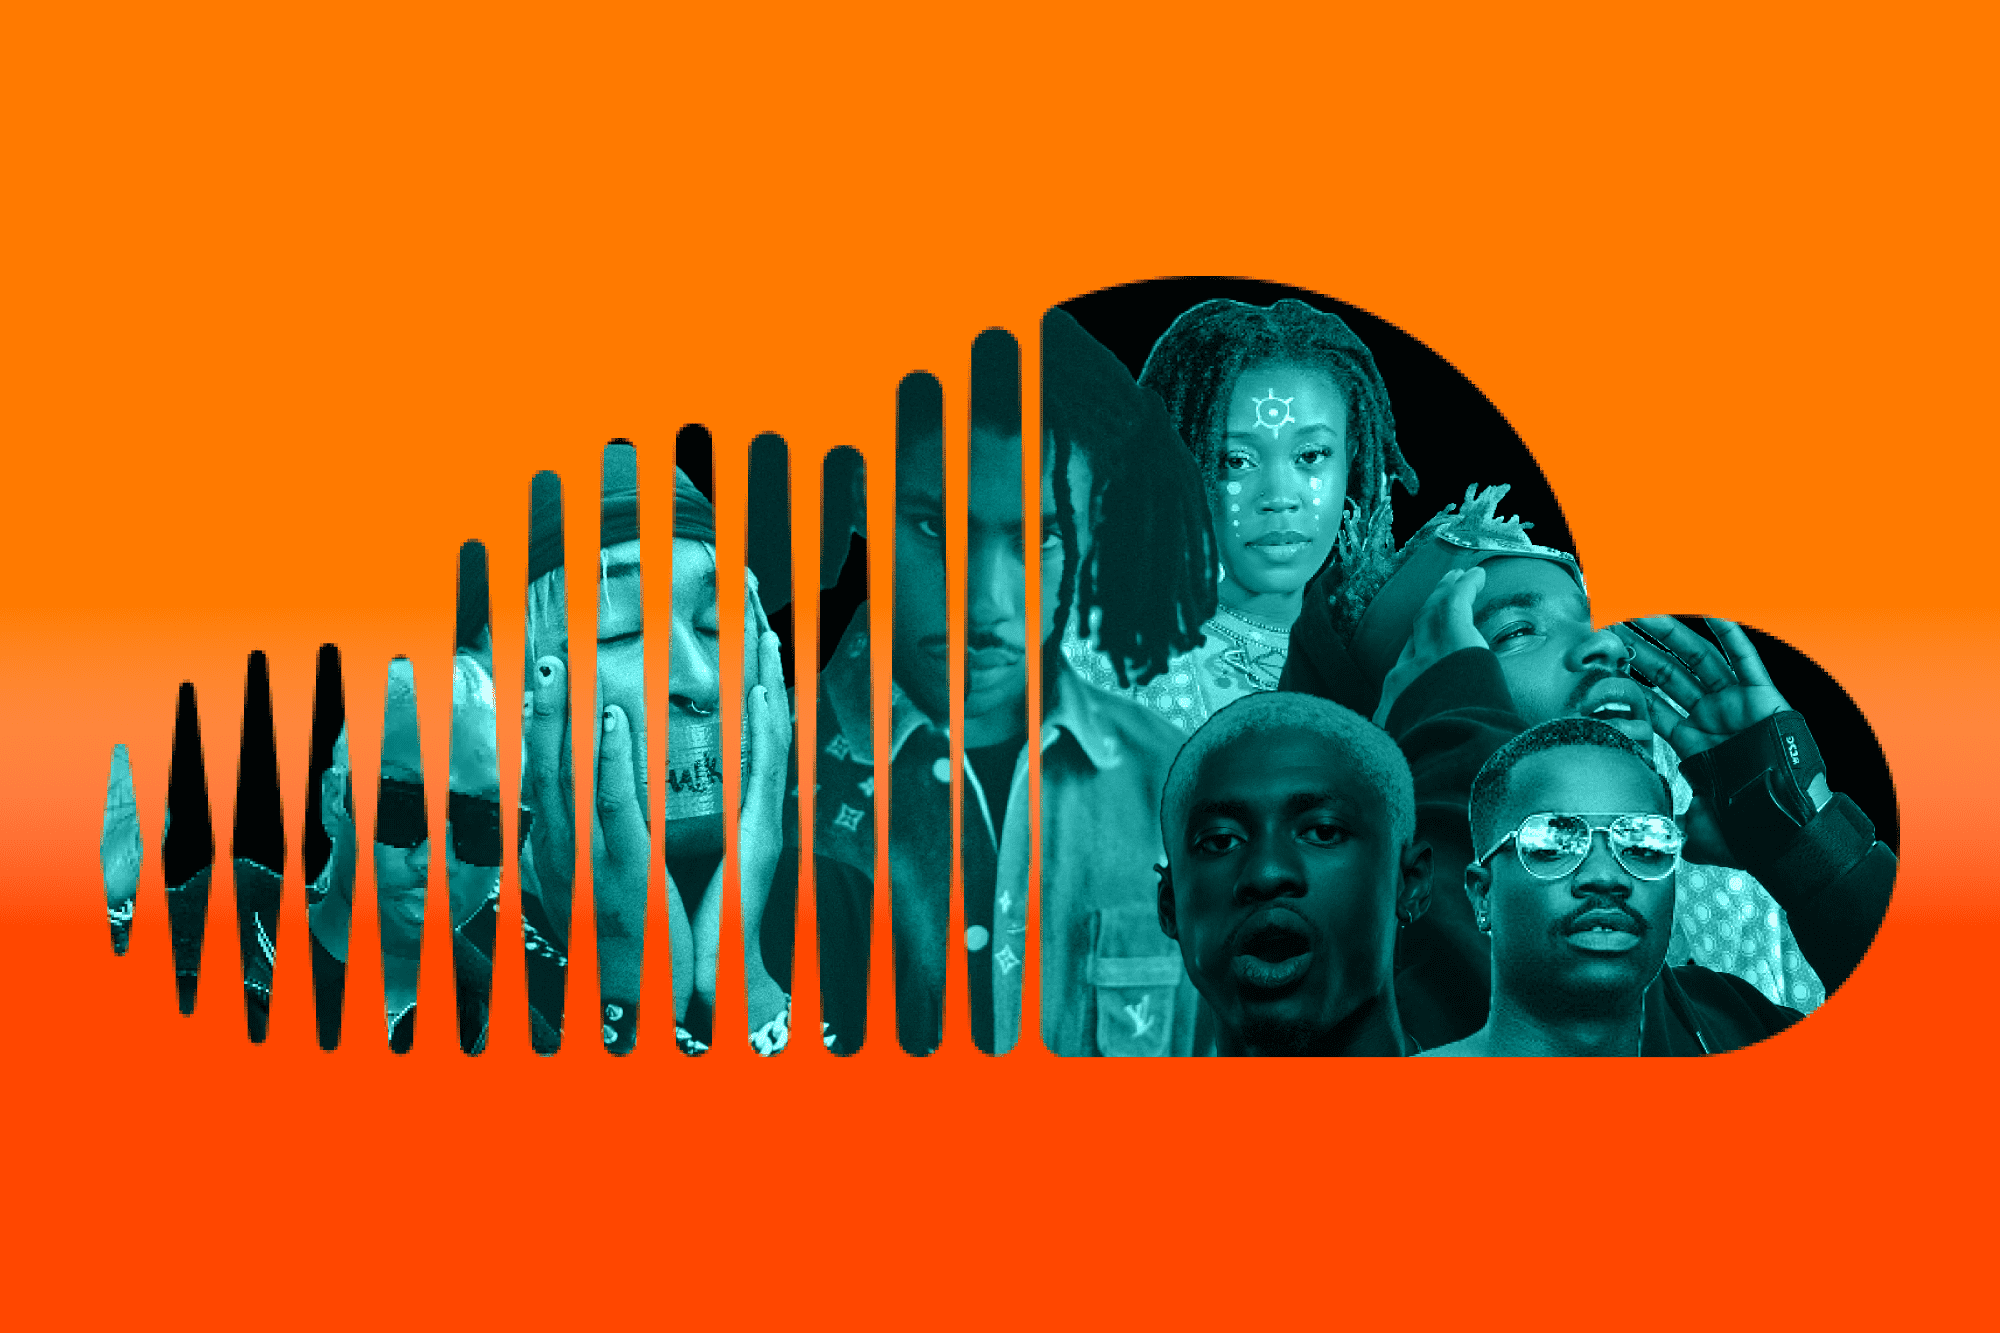 How Soundcloud changed the sound of Afropop music forever